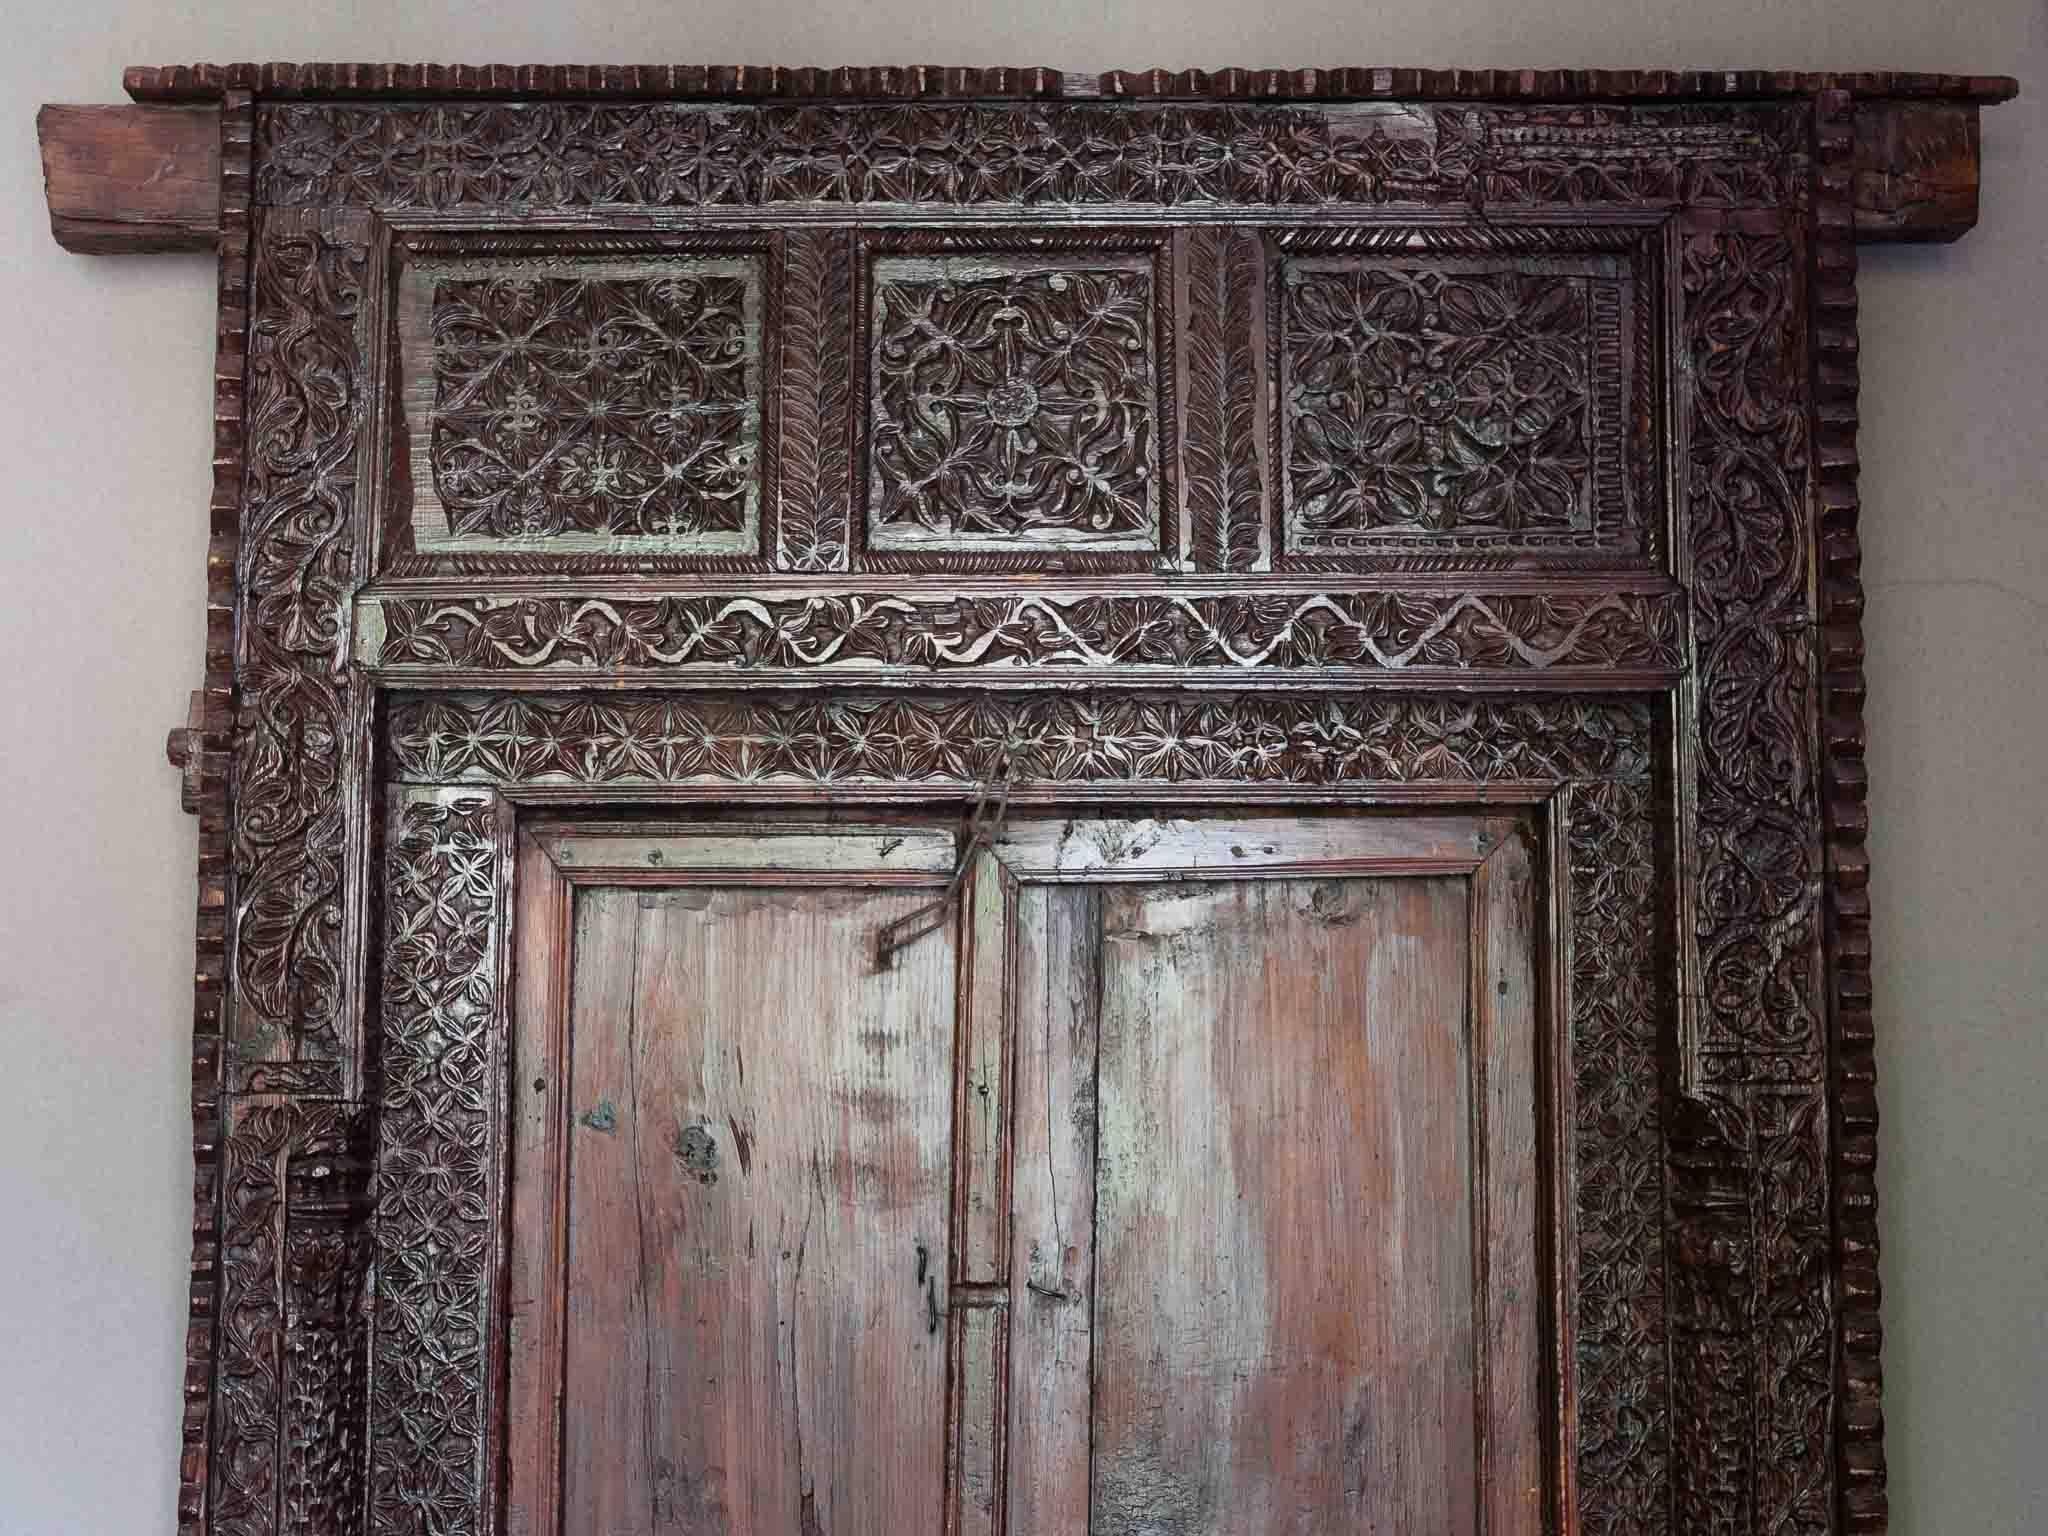 A stunning, ornately and intricately hand carved Indian door frame and doors dating back to the 19th century. The plain doors are easily removed from the back of the frame in order to move or transport the piece. The frame is wonderful as a